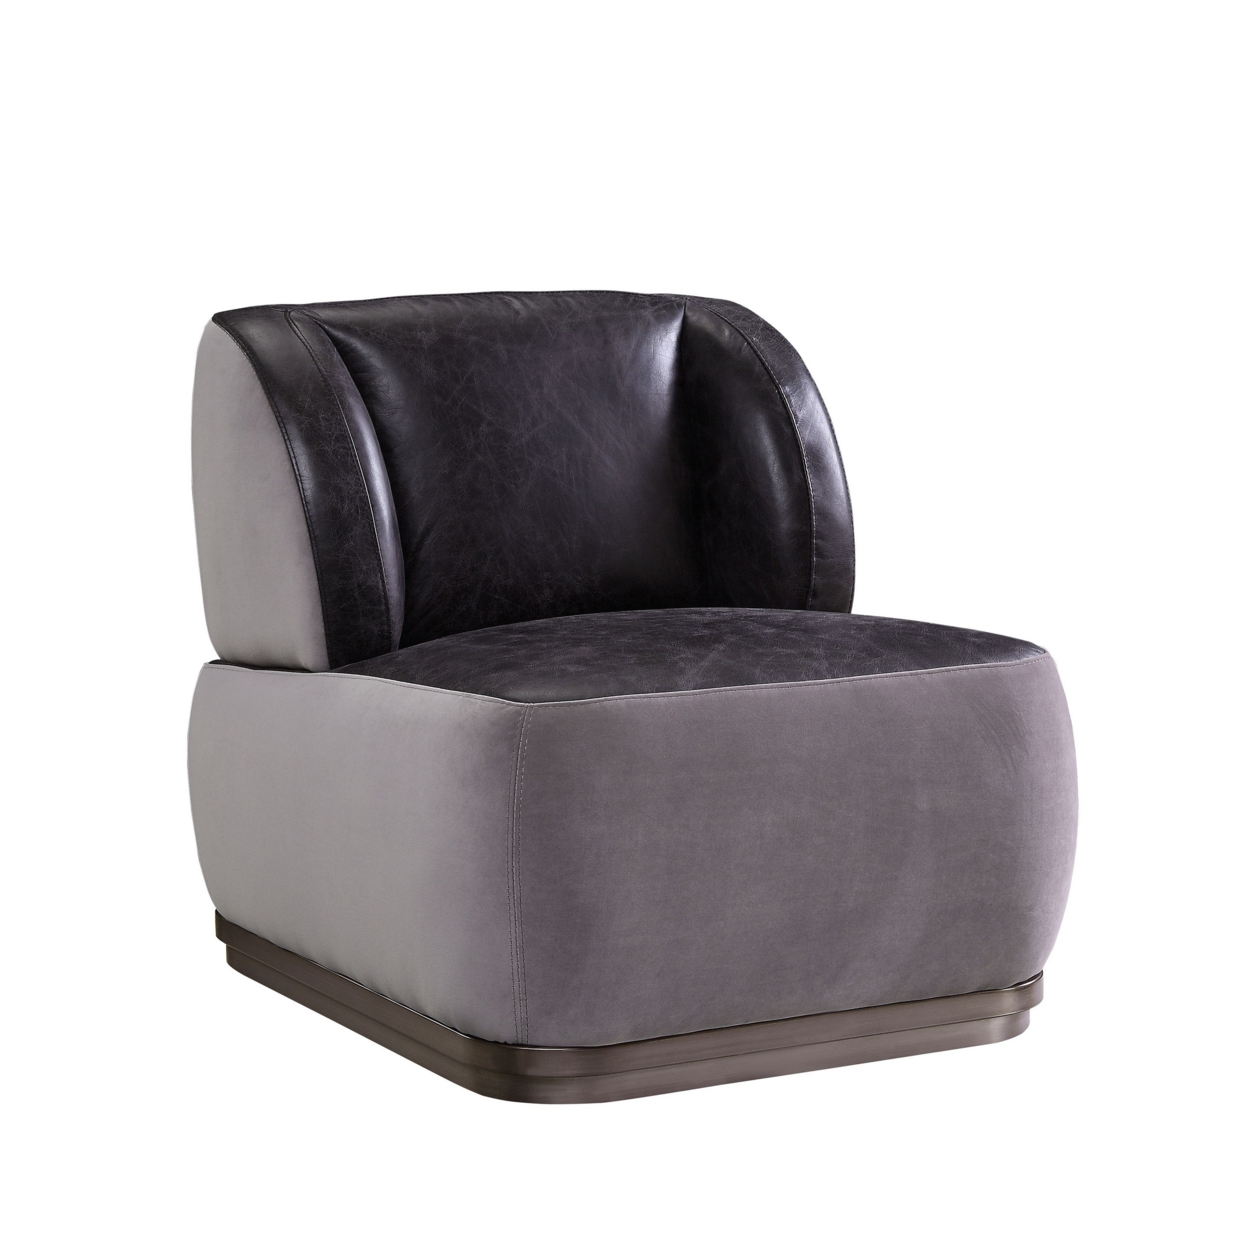 Leatherette Accent Chair With Wingback Design Backrest, Black And Gray- Saltoro Sherpi